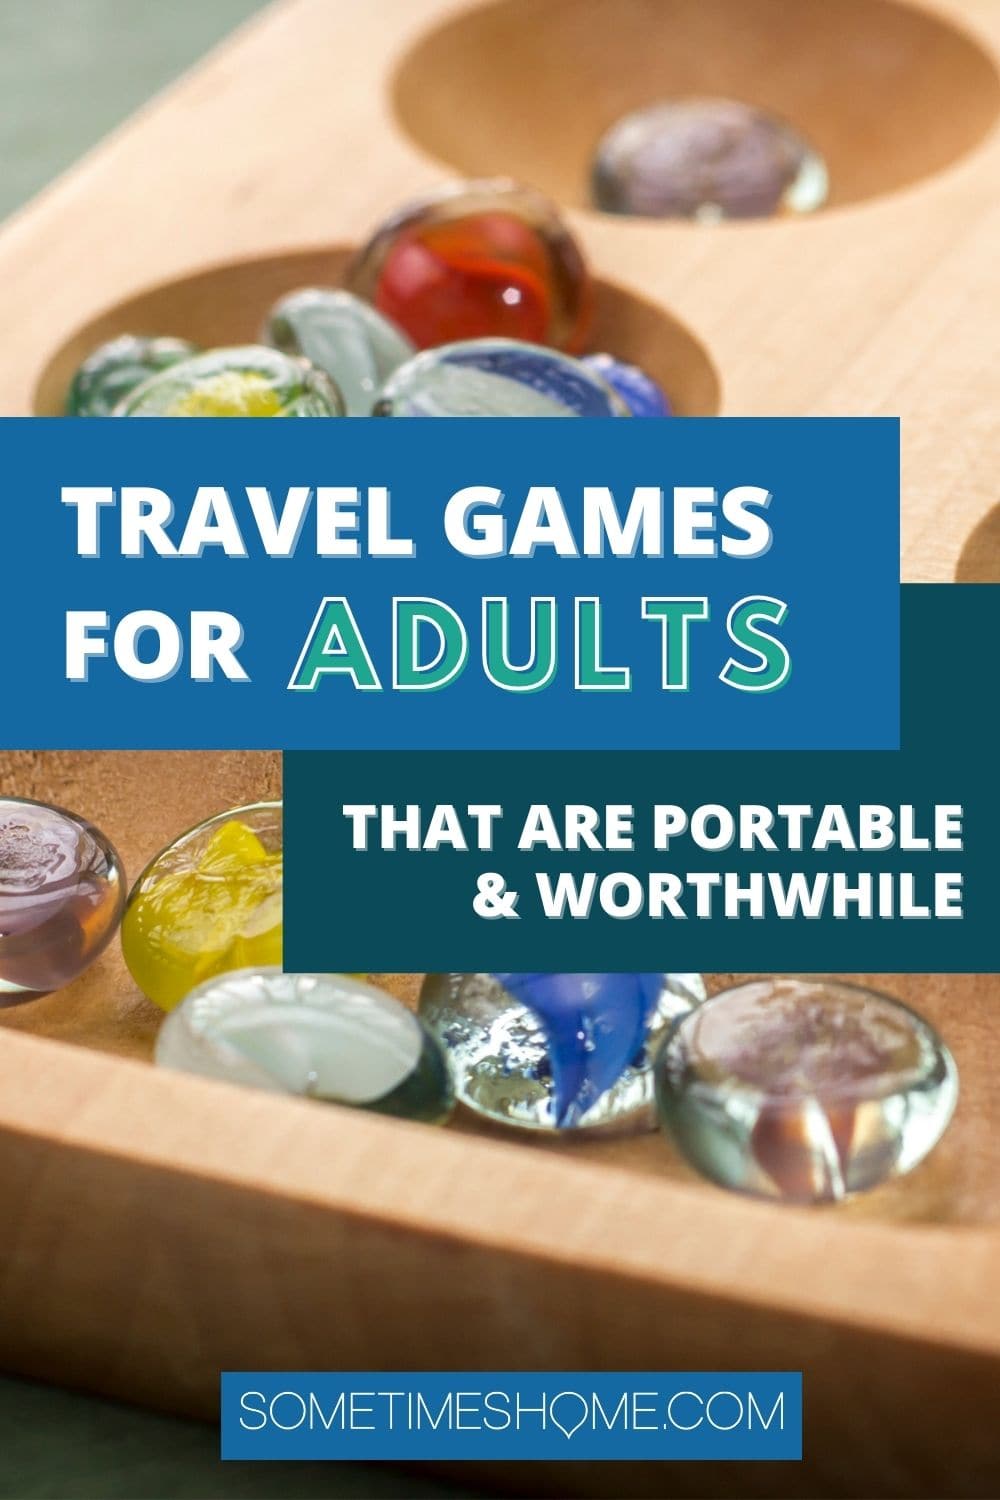 Travel games for adults words on top of a close up photo of the game, Mancala, with glass beads.